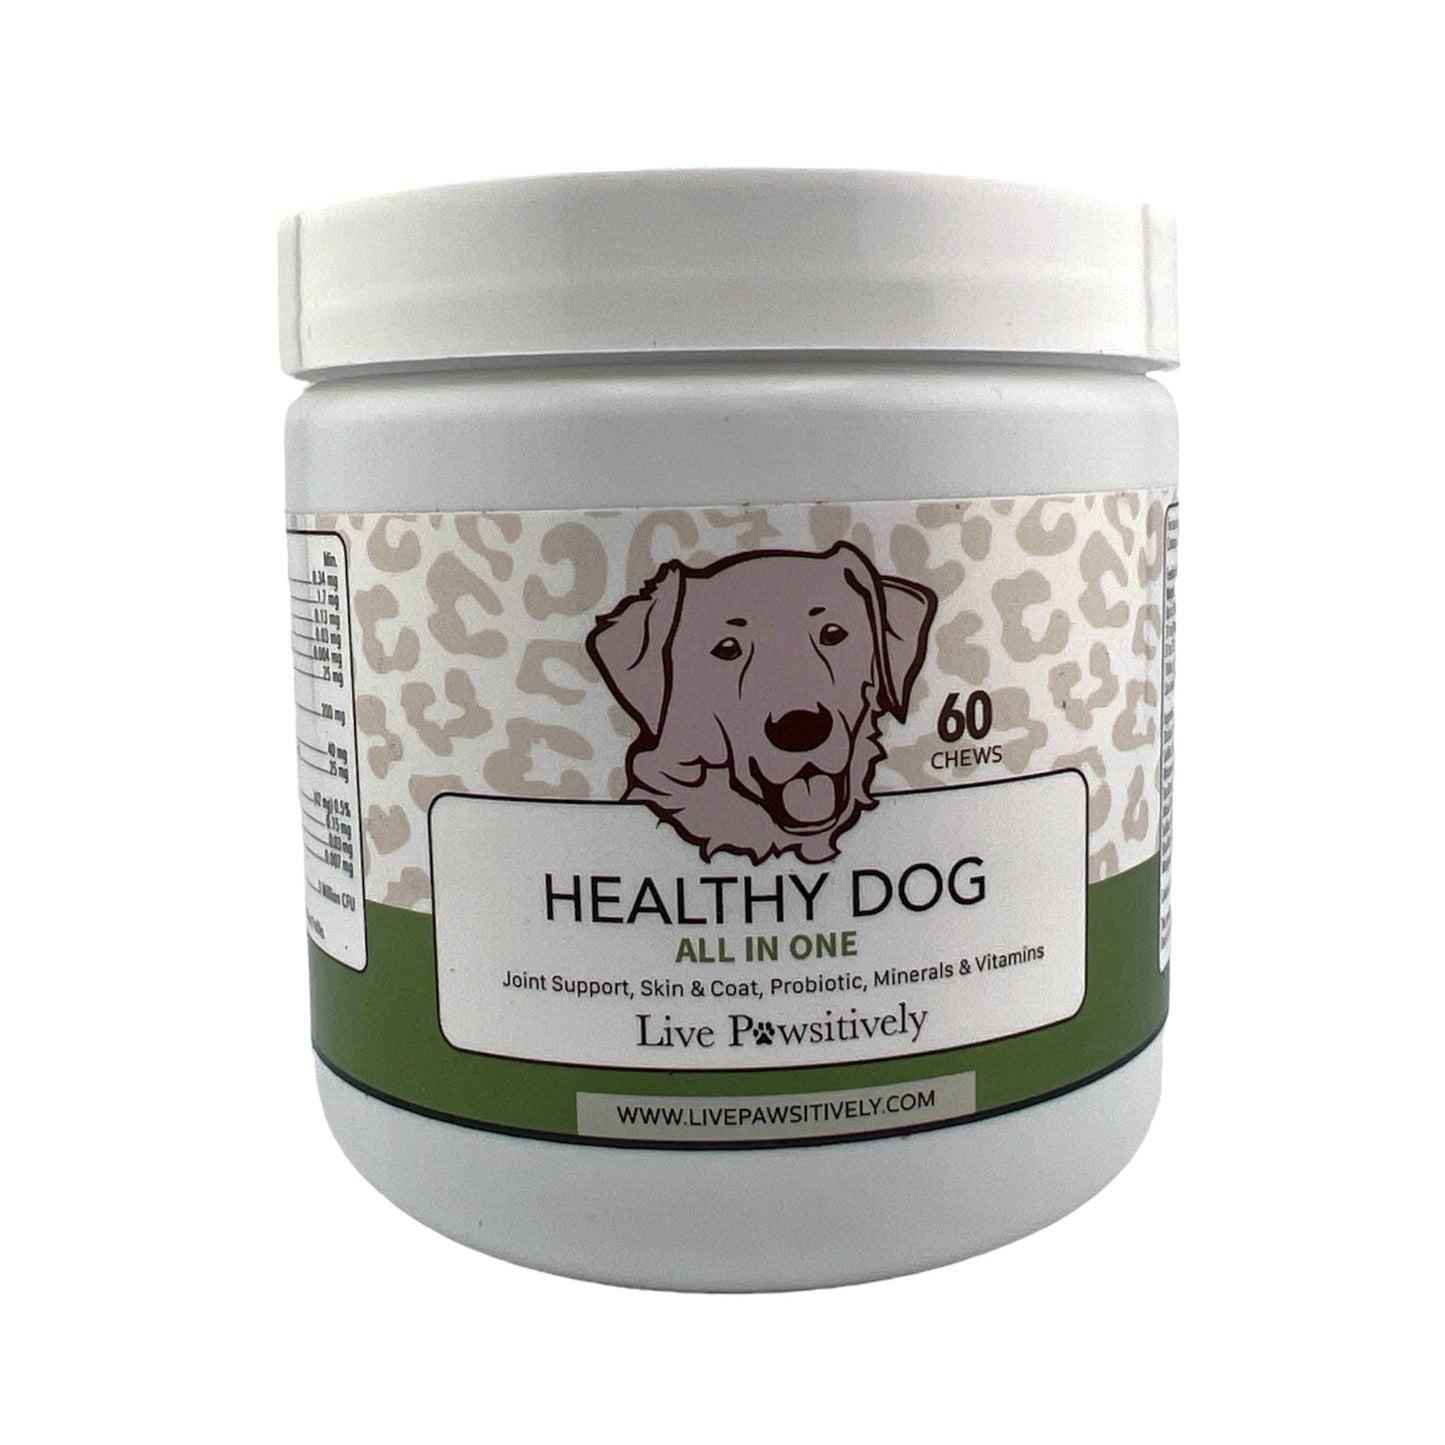 Healthy Dog All in one Supplement dog chew, made in USA: 60 soft chews